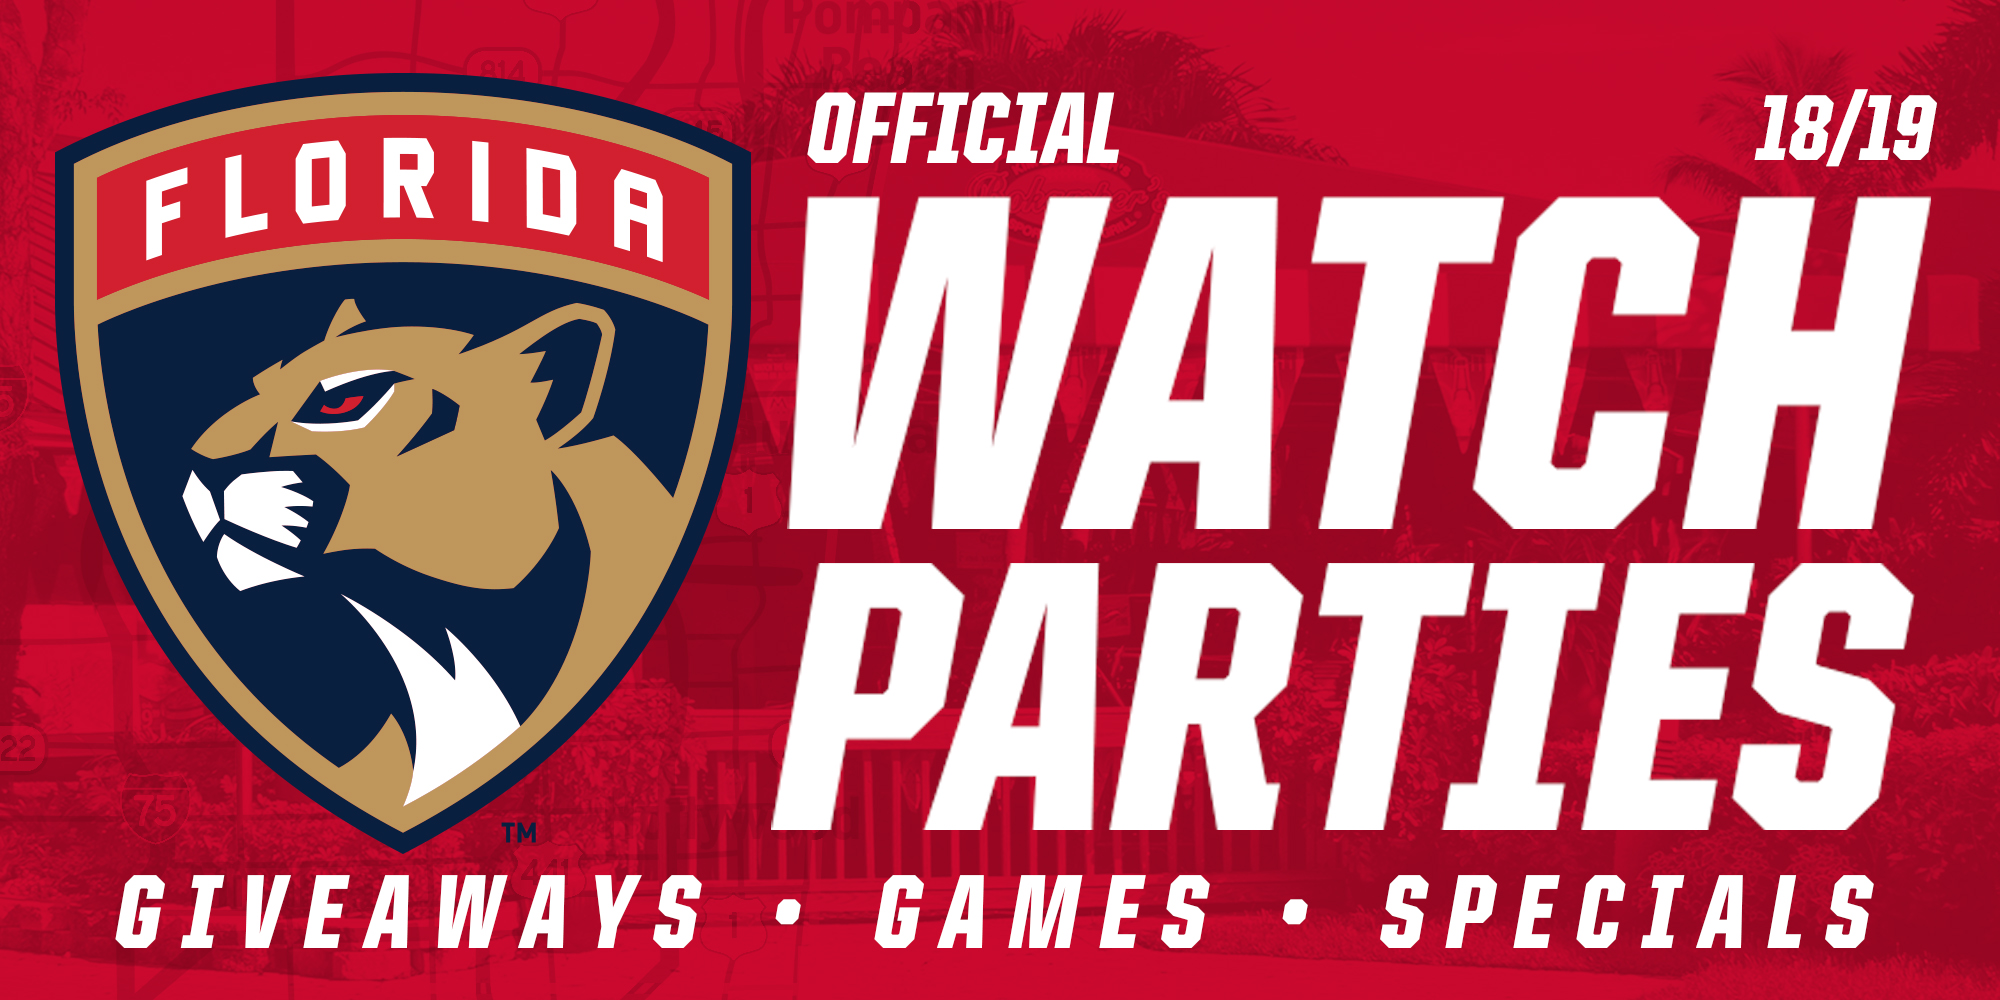 Florida Panthers Official Watch Parties image.